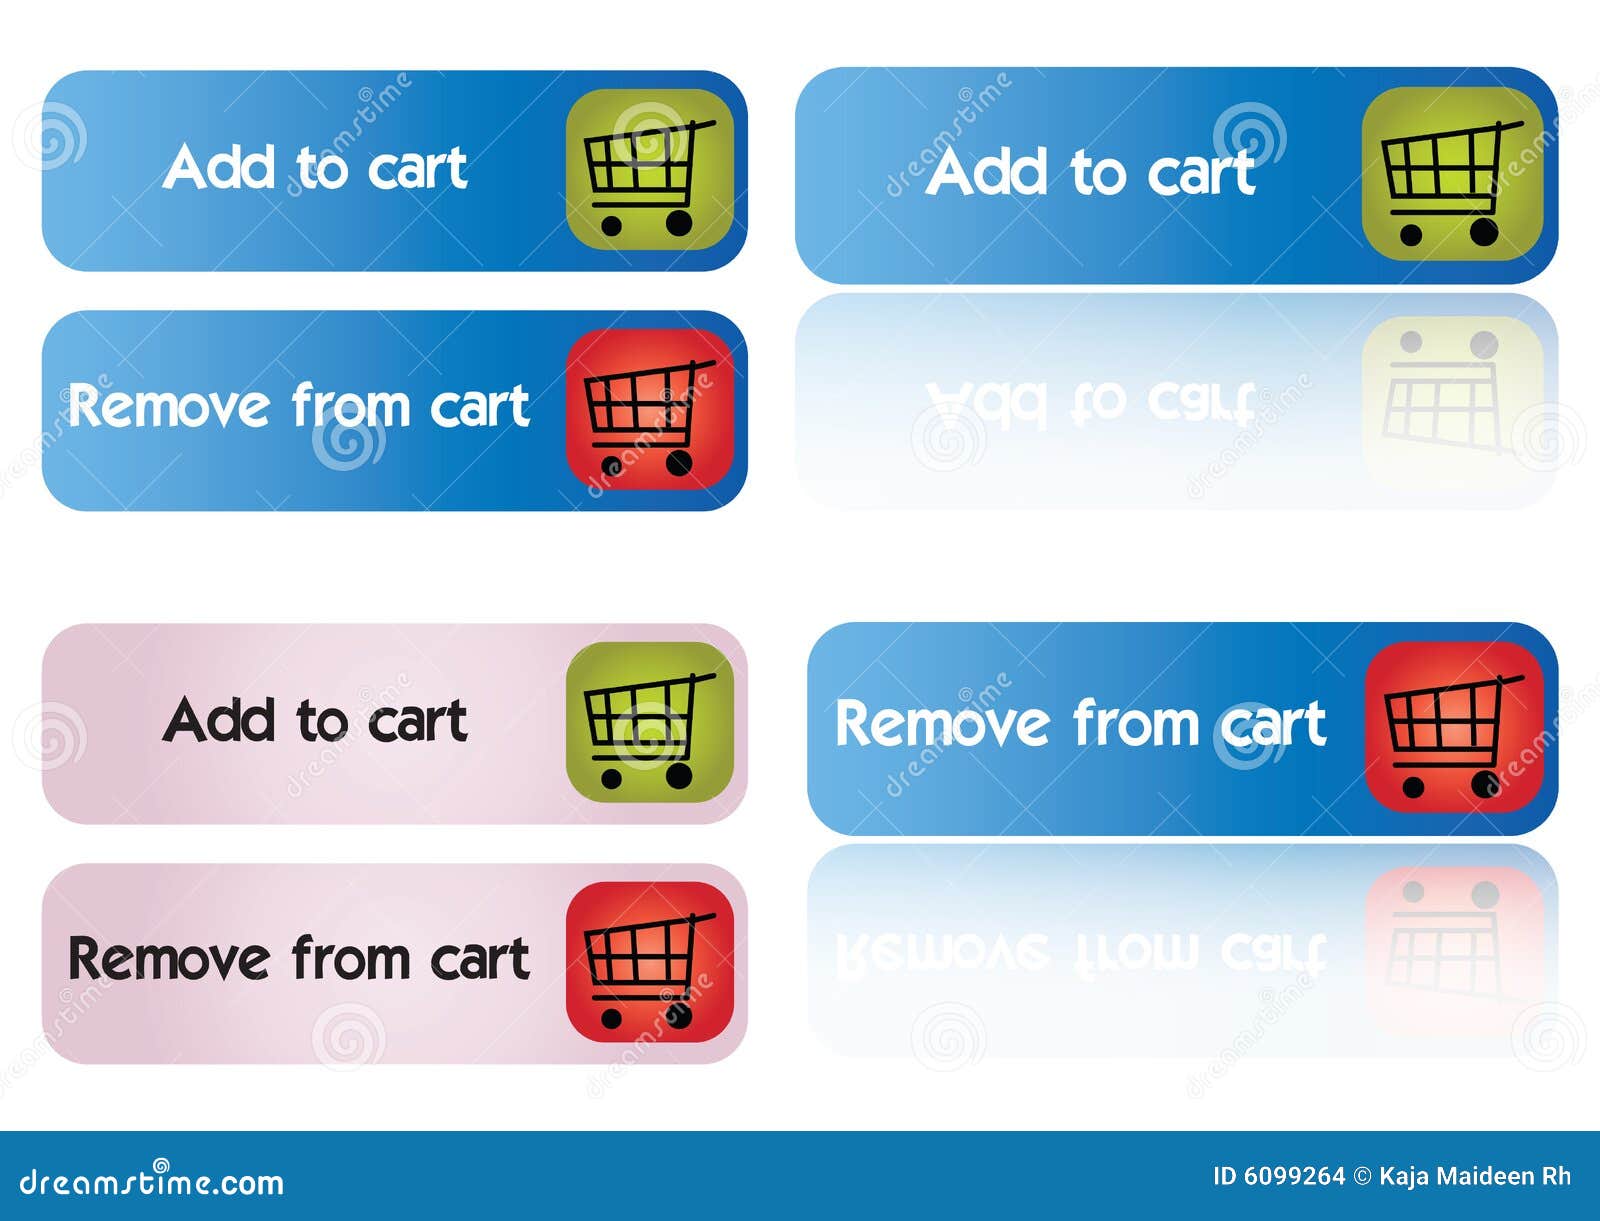 add and remove cart - 